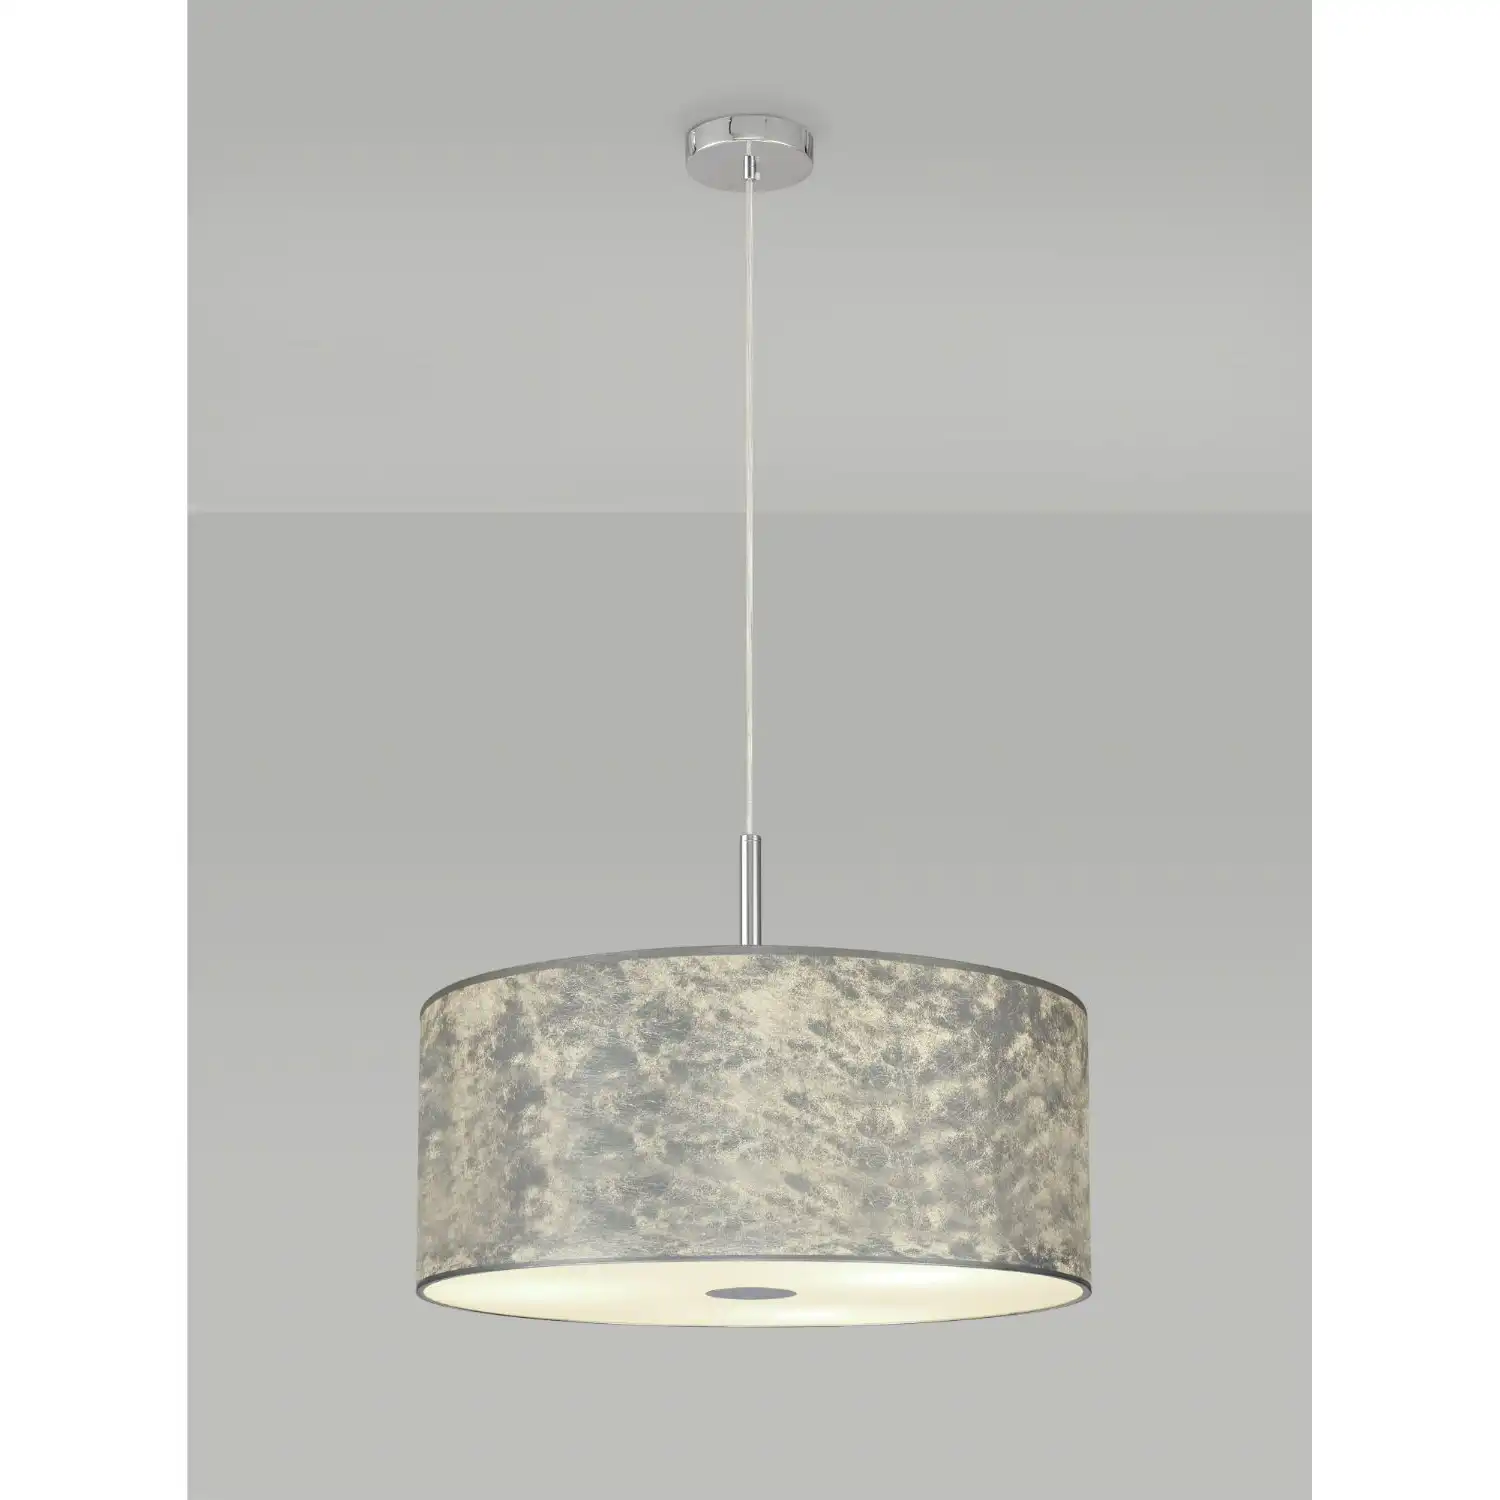 Baymont Polished Chrome 3m 5 Light E27 Single Pendant With 600mm Silver Leaf Shade With Frosted Acrylic Diffuser With Polished Chrome Centre